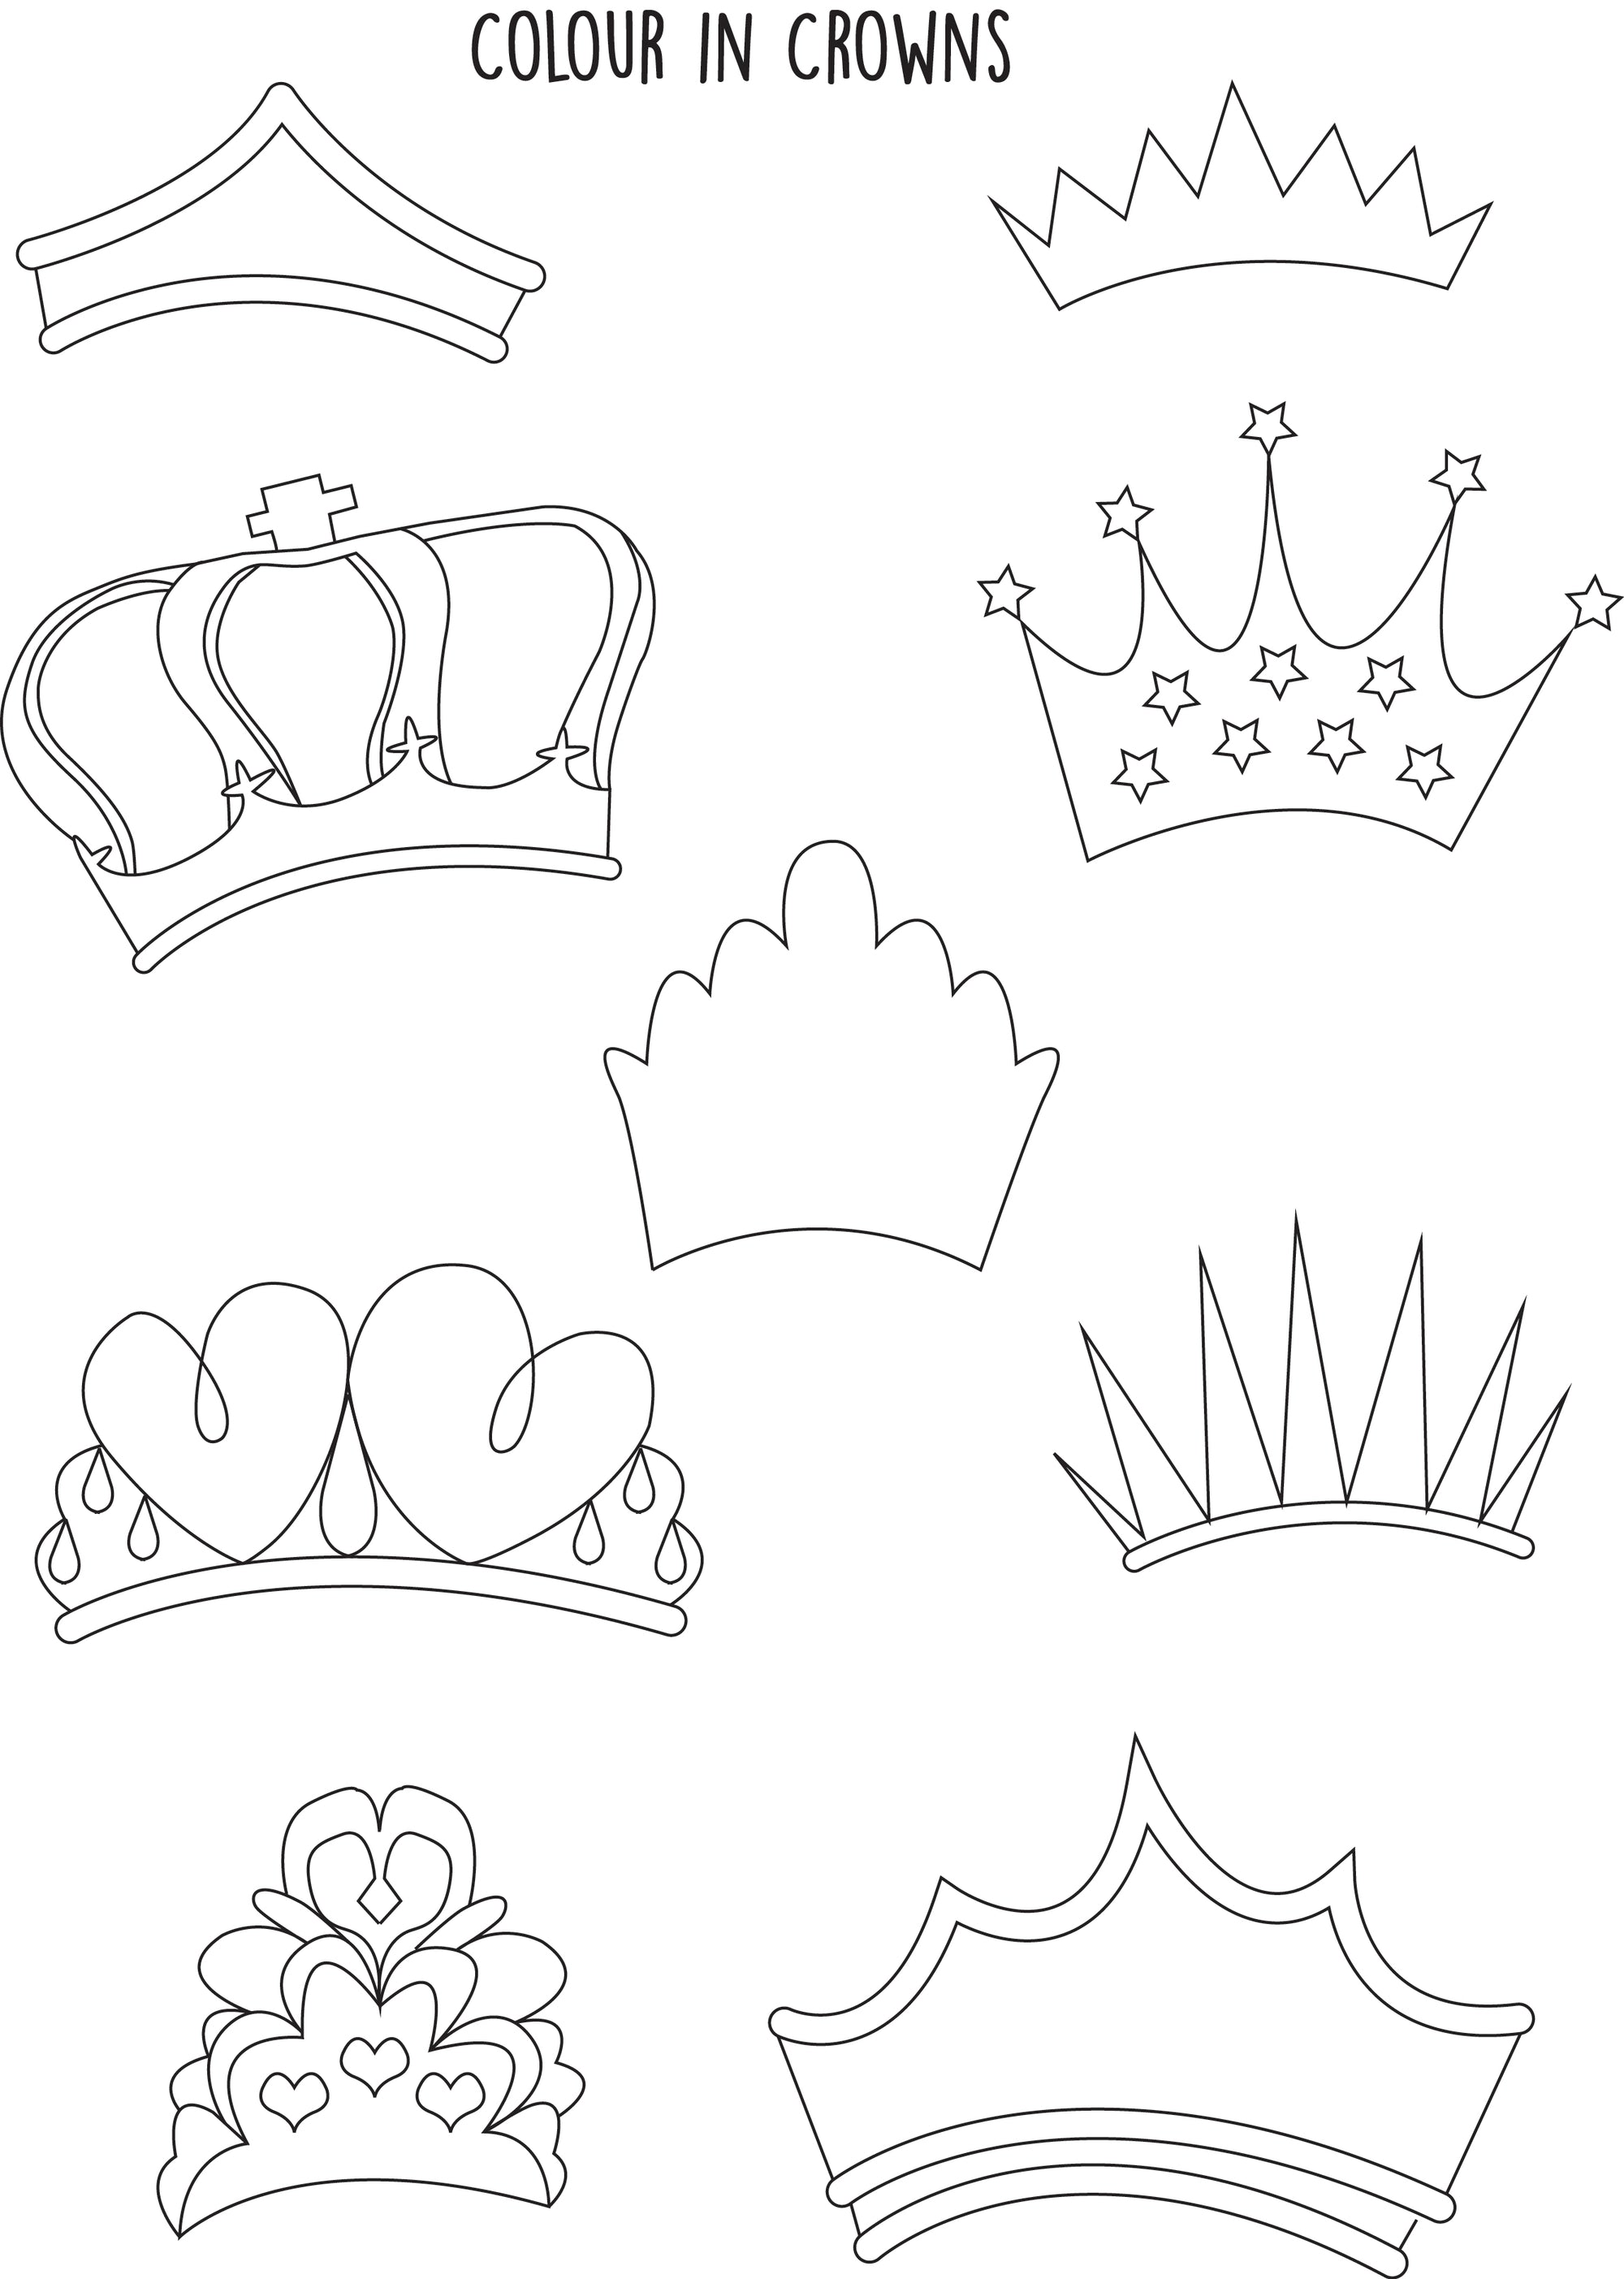 Colour in Crowns